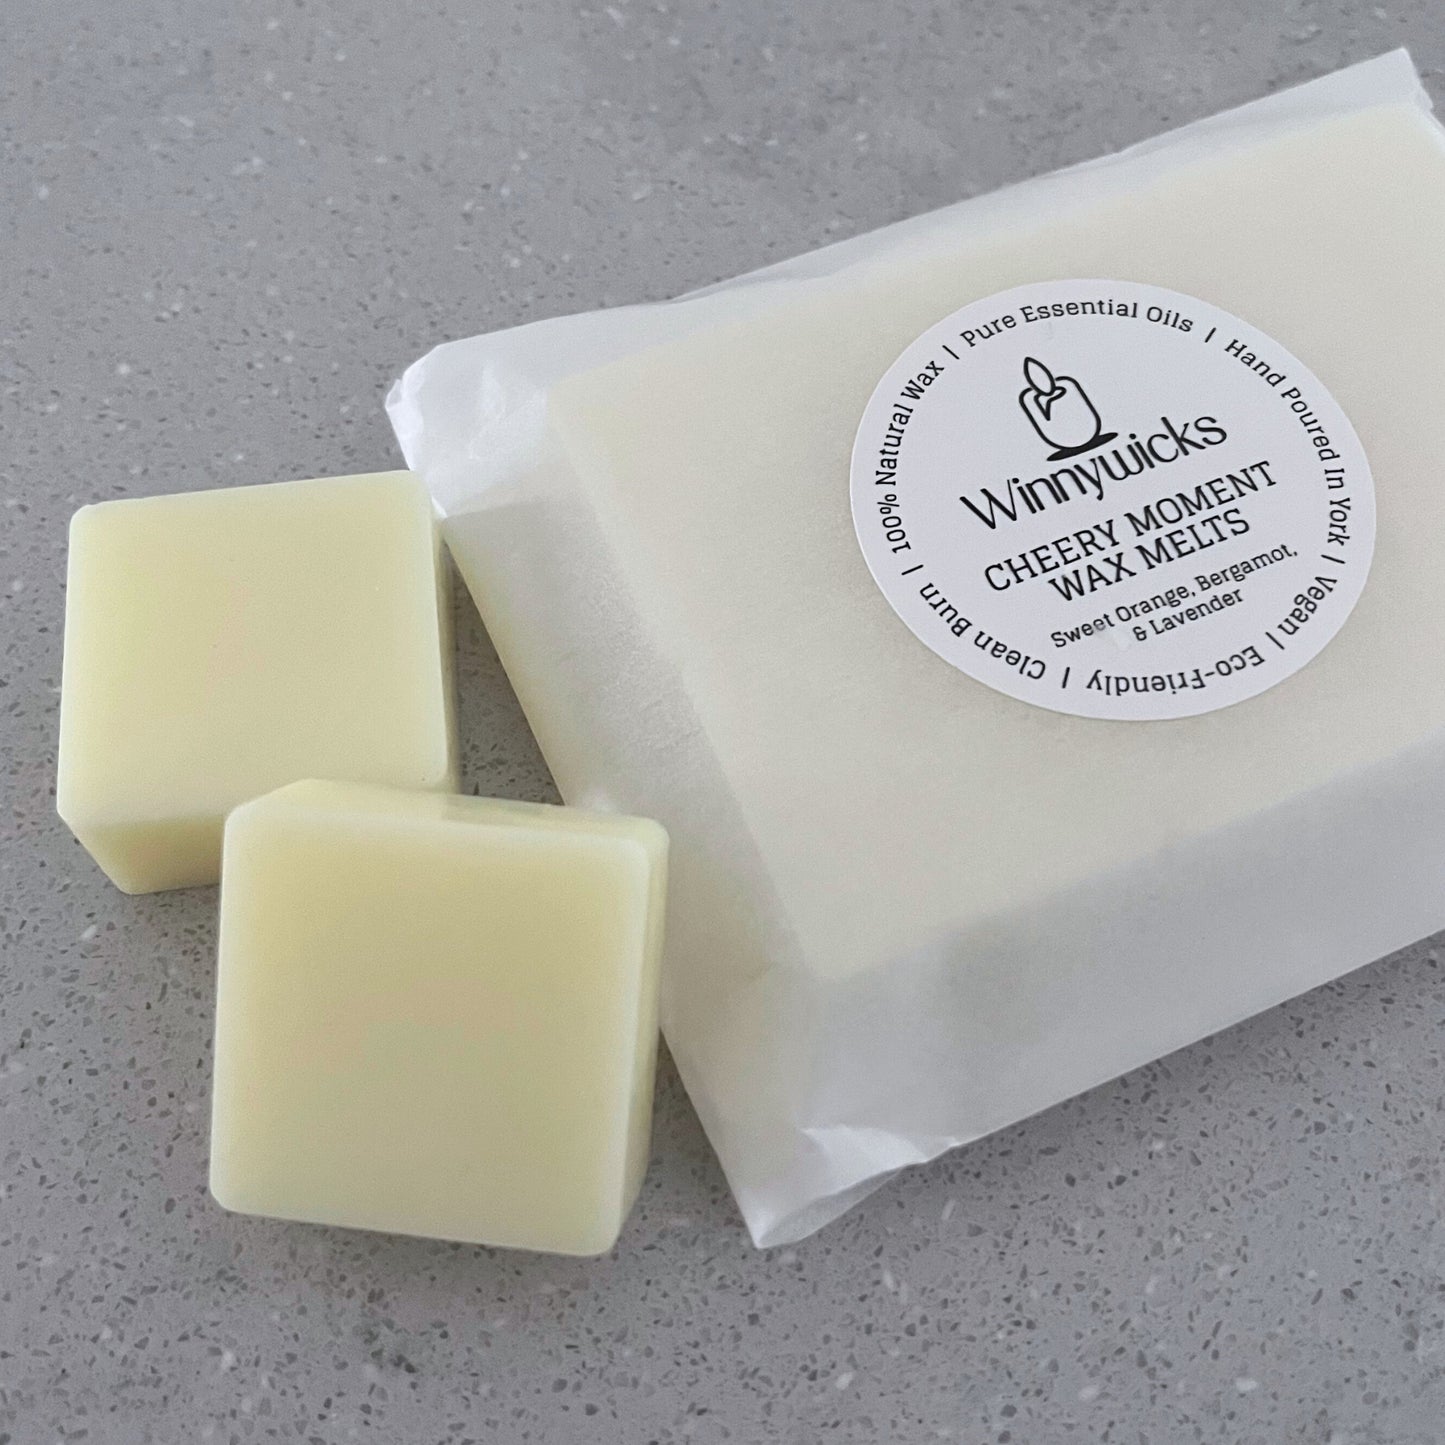 Cheery Moment Wax Melts - 6 Per Pack